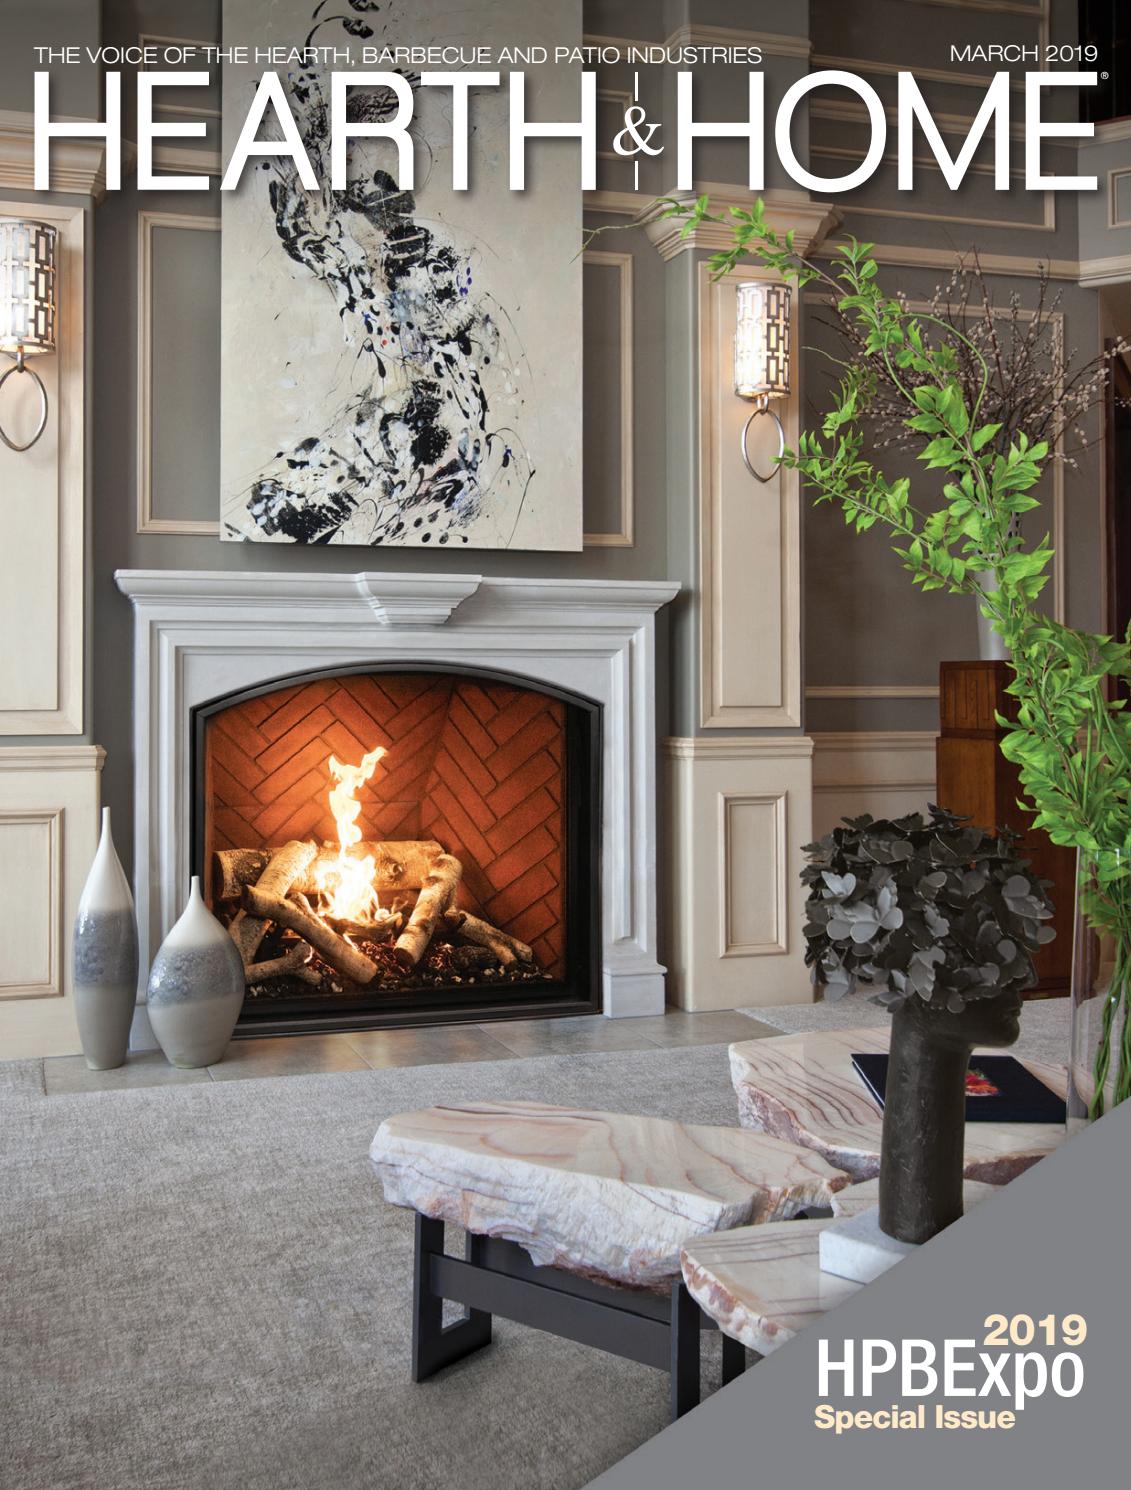 Fireplace Fresh Air Intake Vent Lovely Hearth & Home Magazine – 2019 March issue by Hearth & Home